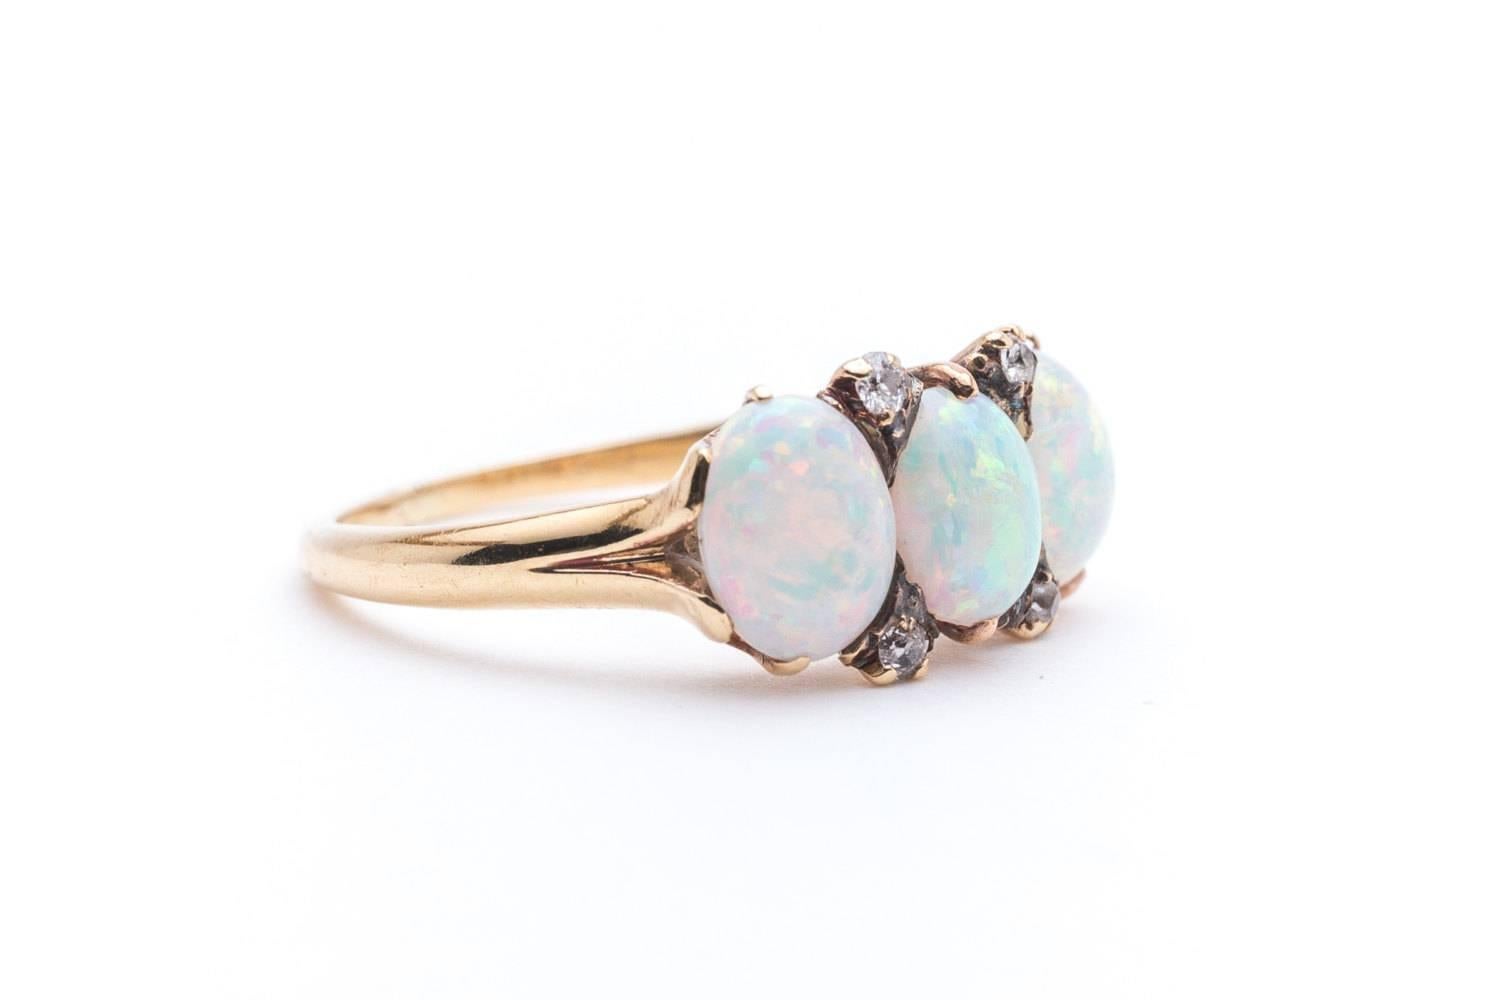 An antique victorian era opal and diamond ring in 18 karat yellow gold. Centered by a trio of perfectly matched natural Australian opals this ring features a hand crafted filigree mounting.

Of beautiful vivid color, the opals feature a blue ground